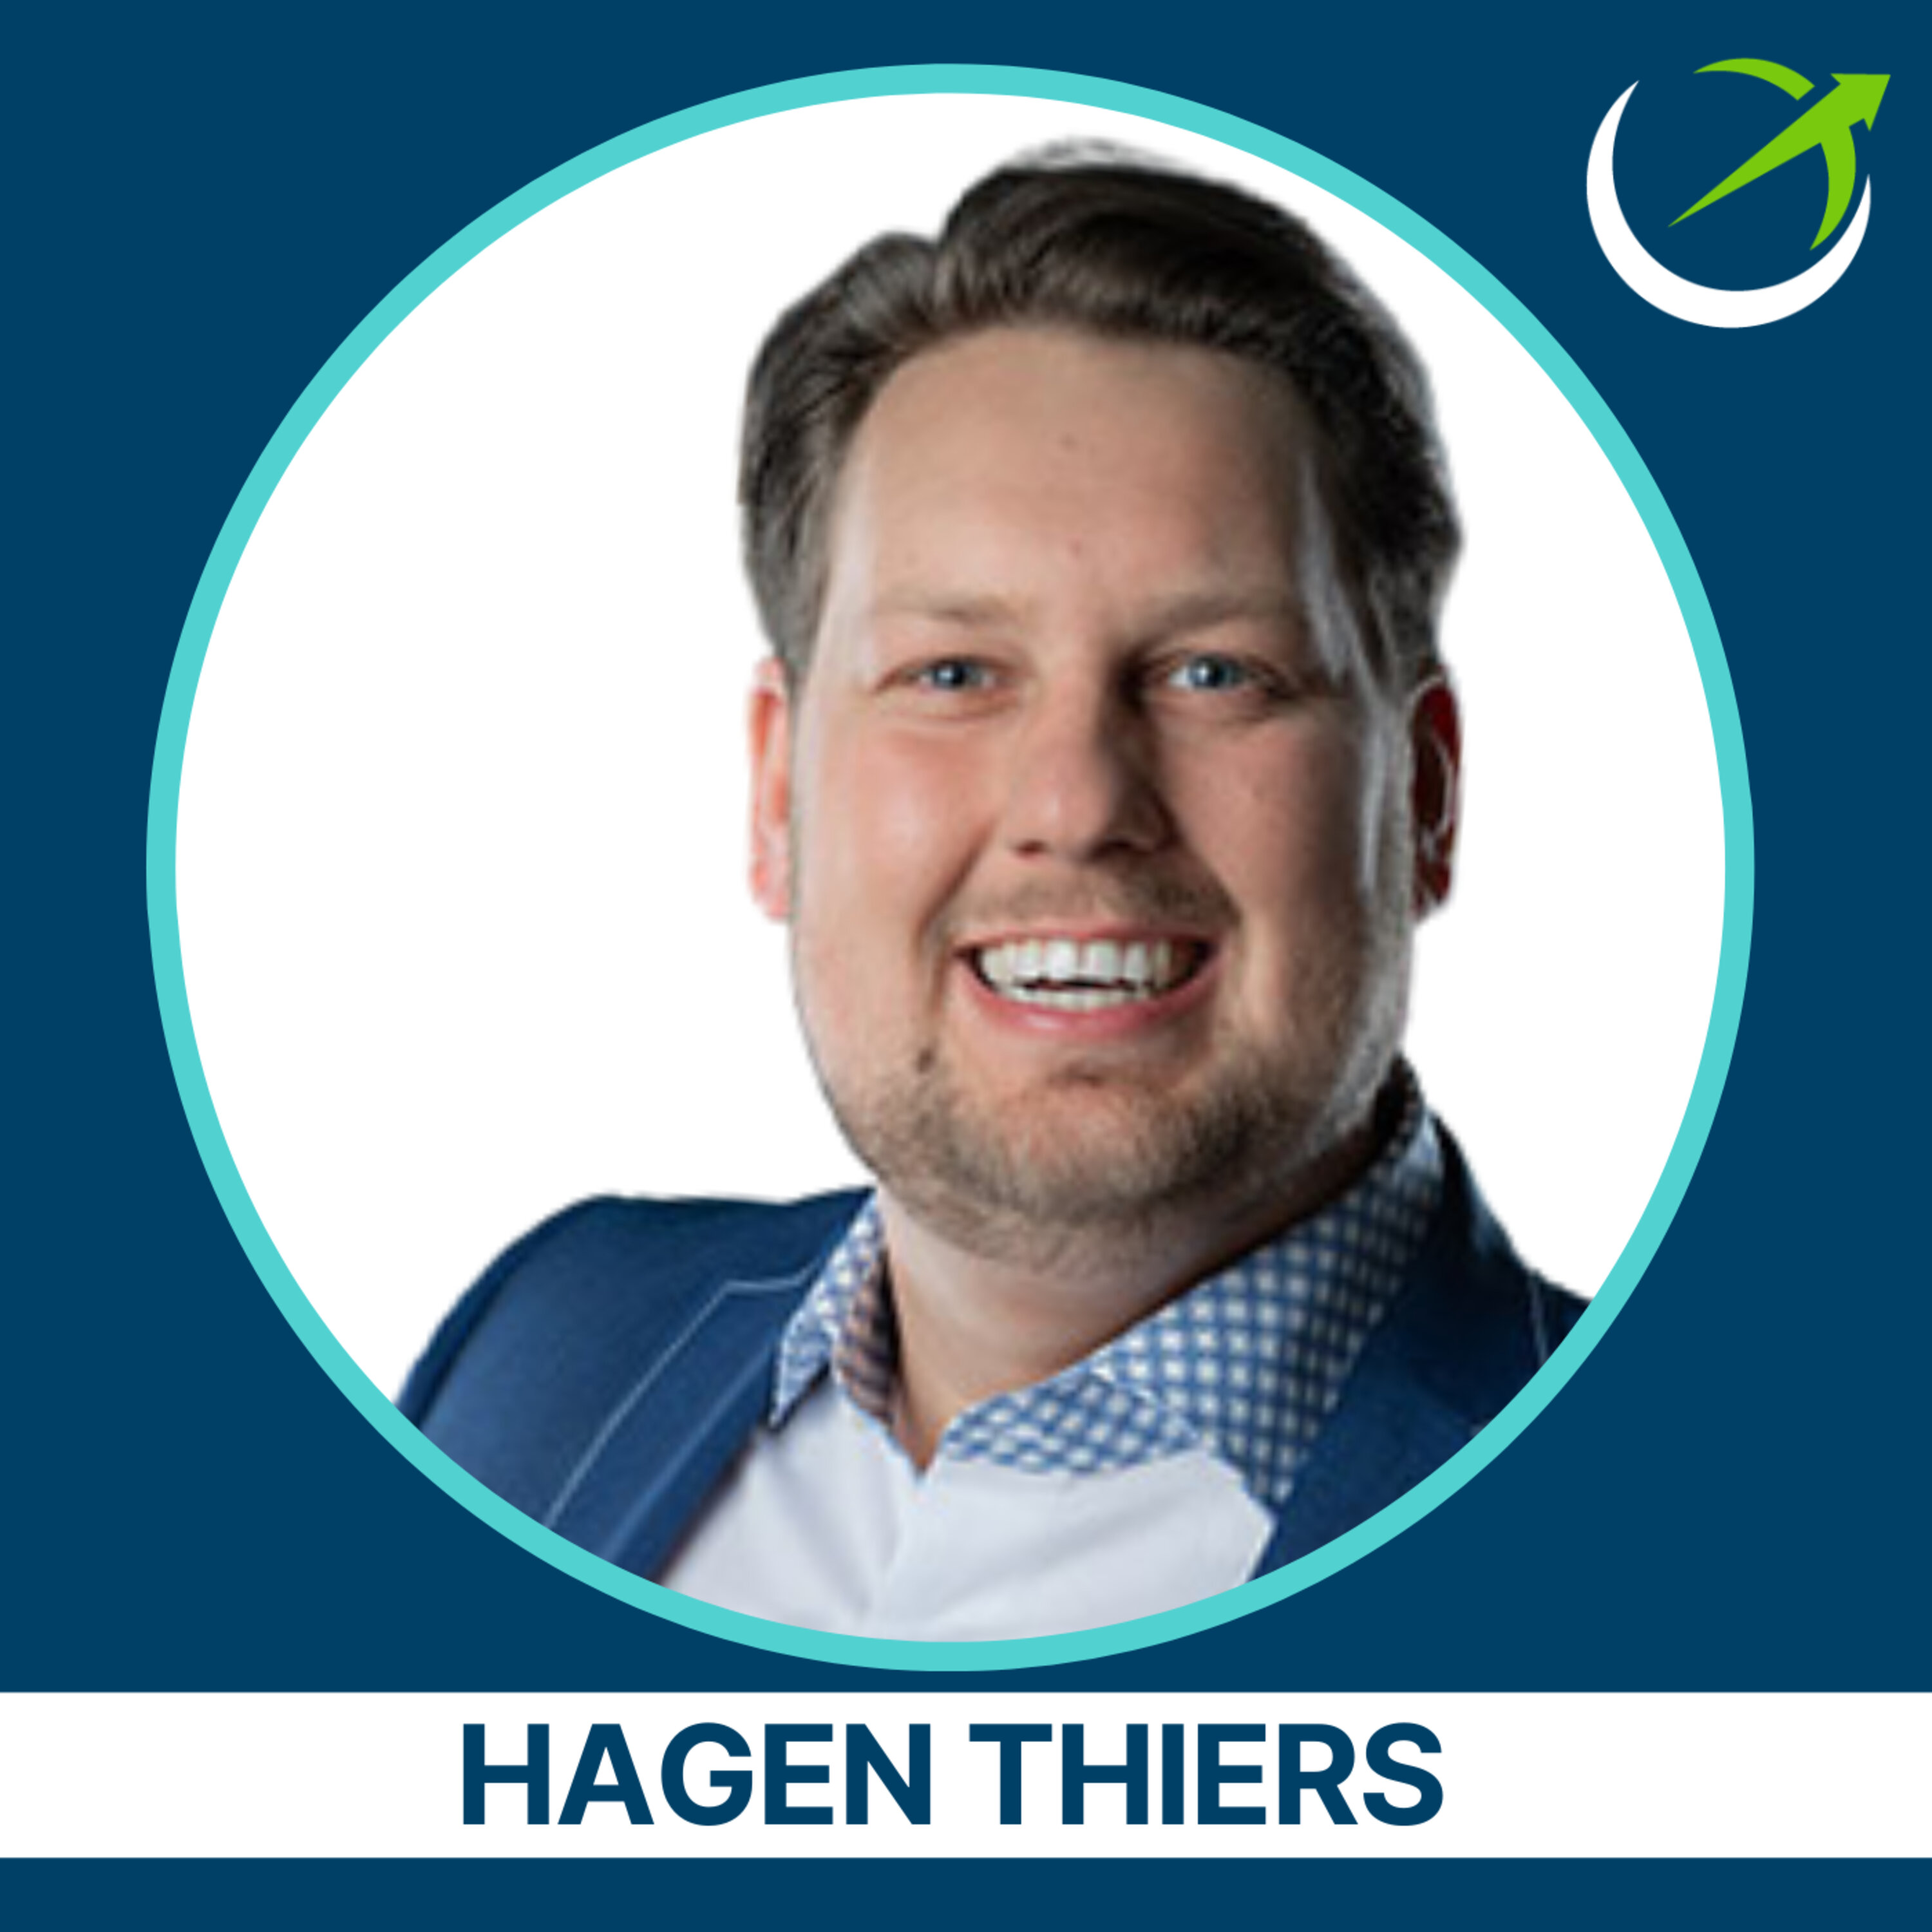 The Best EMF Protection Devices, How To Build A Smart Home That's Low EMF, Fraud In the EMF Industry & More With Hagen Thiers Of Qi Technologies & Waveguard.